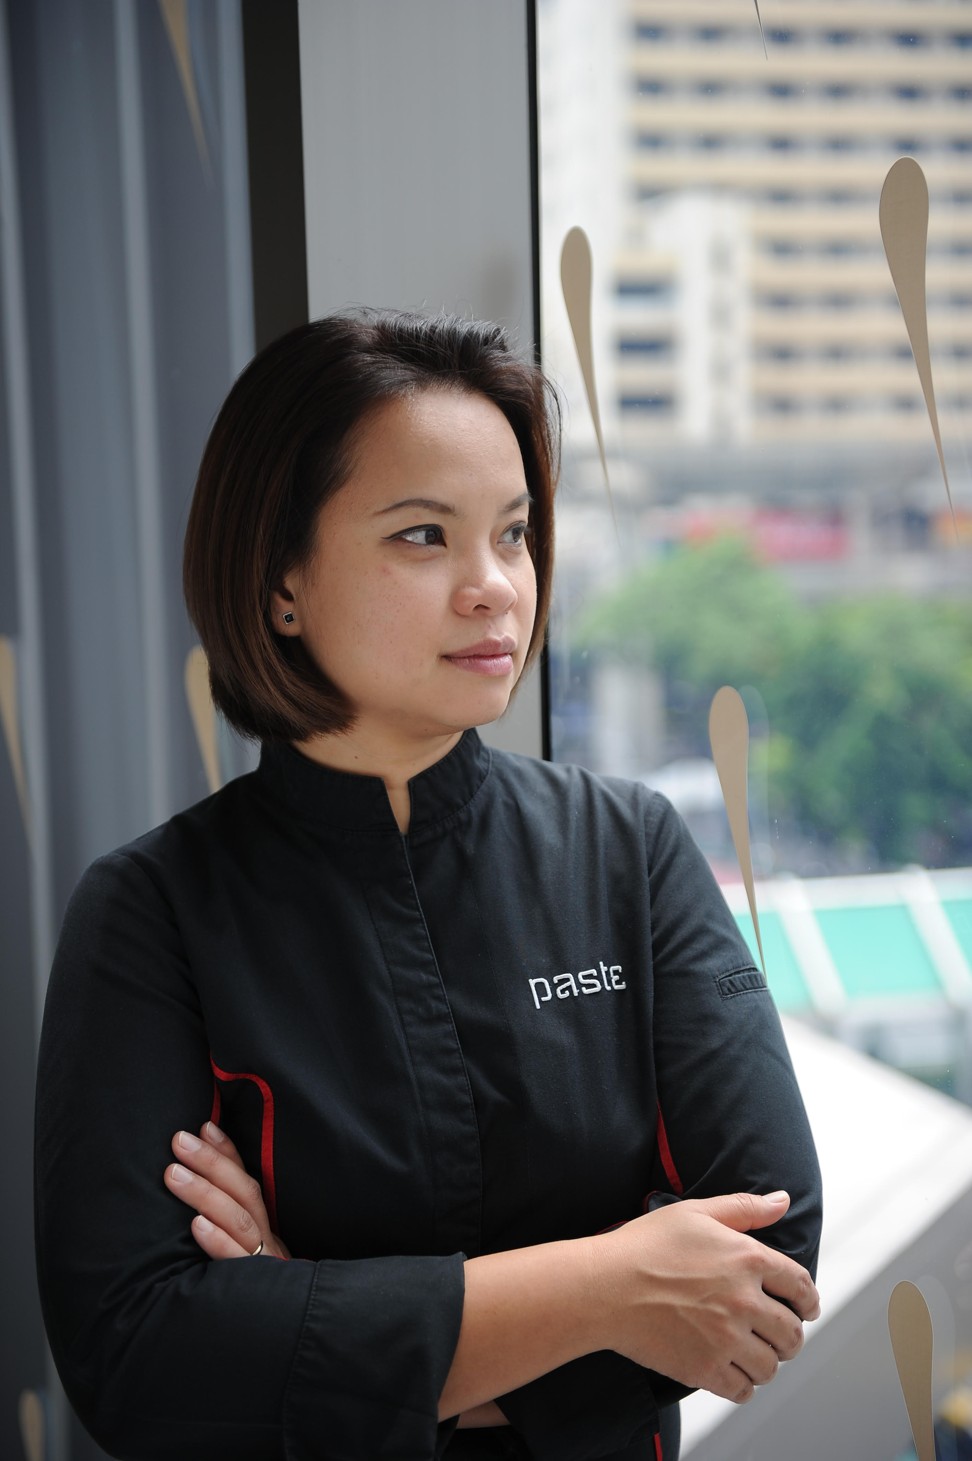 Chef Bongkoch Satongun of the one-star Paste says now is an exciting time for Thai cuisine.